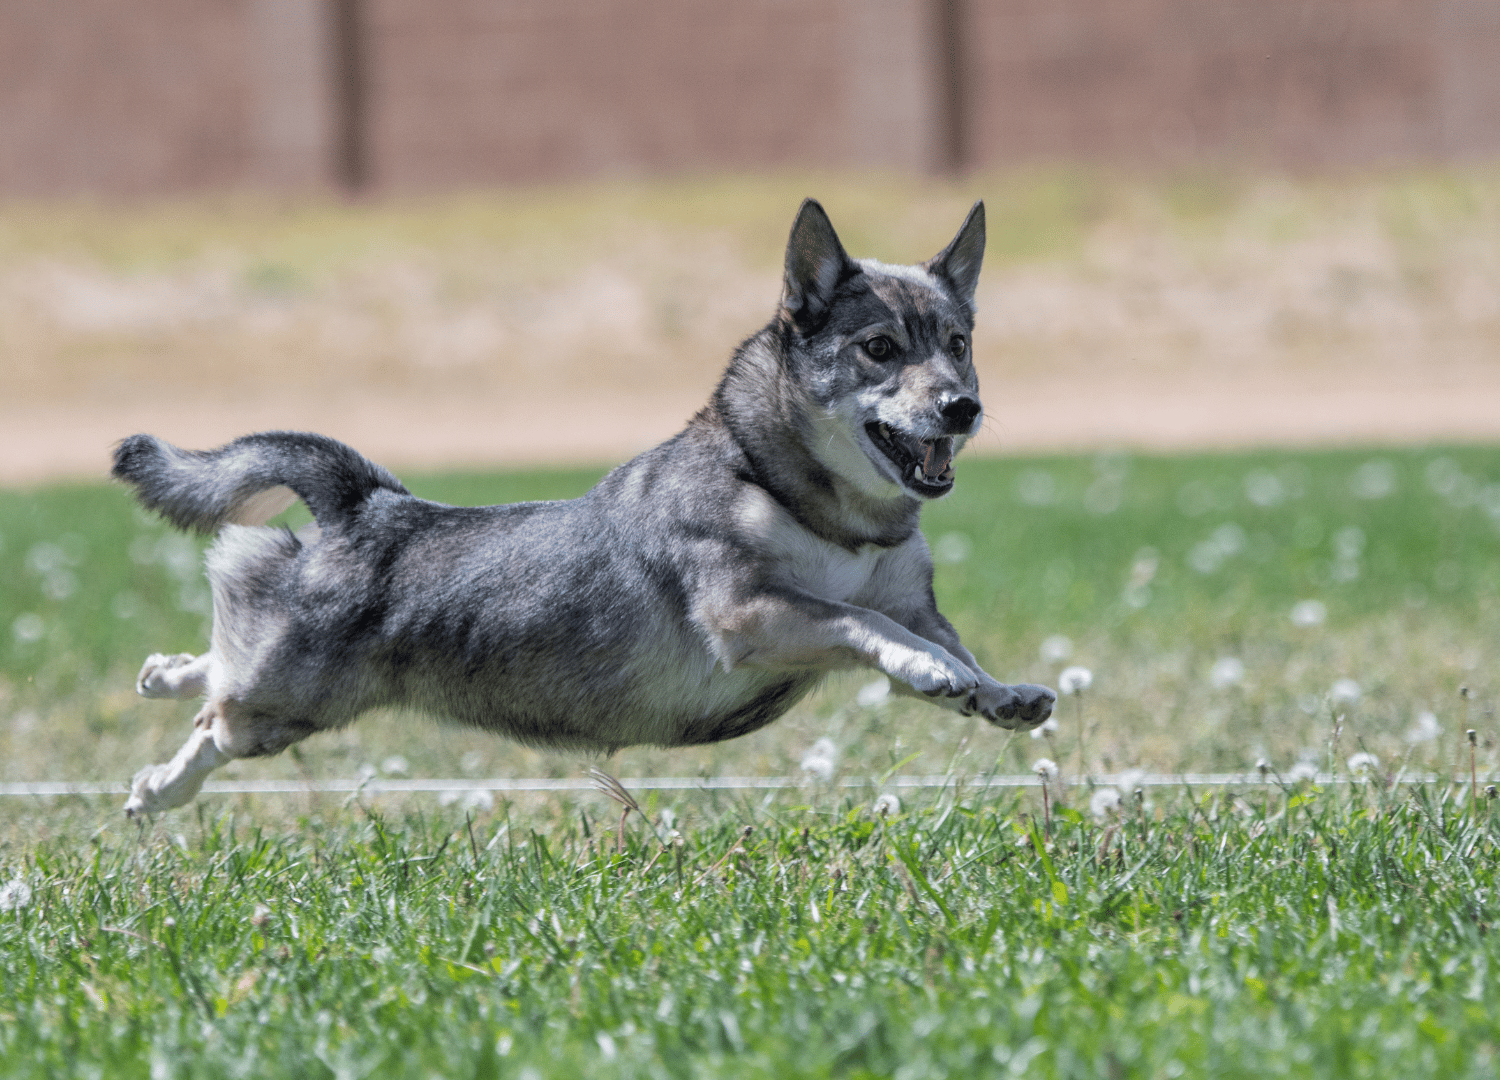 Dogs That Look Like Wolves: Swedish Vallhund